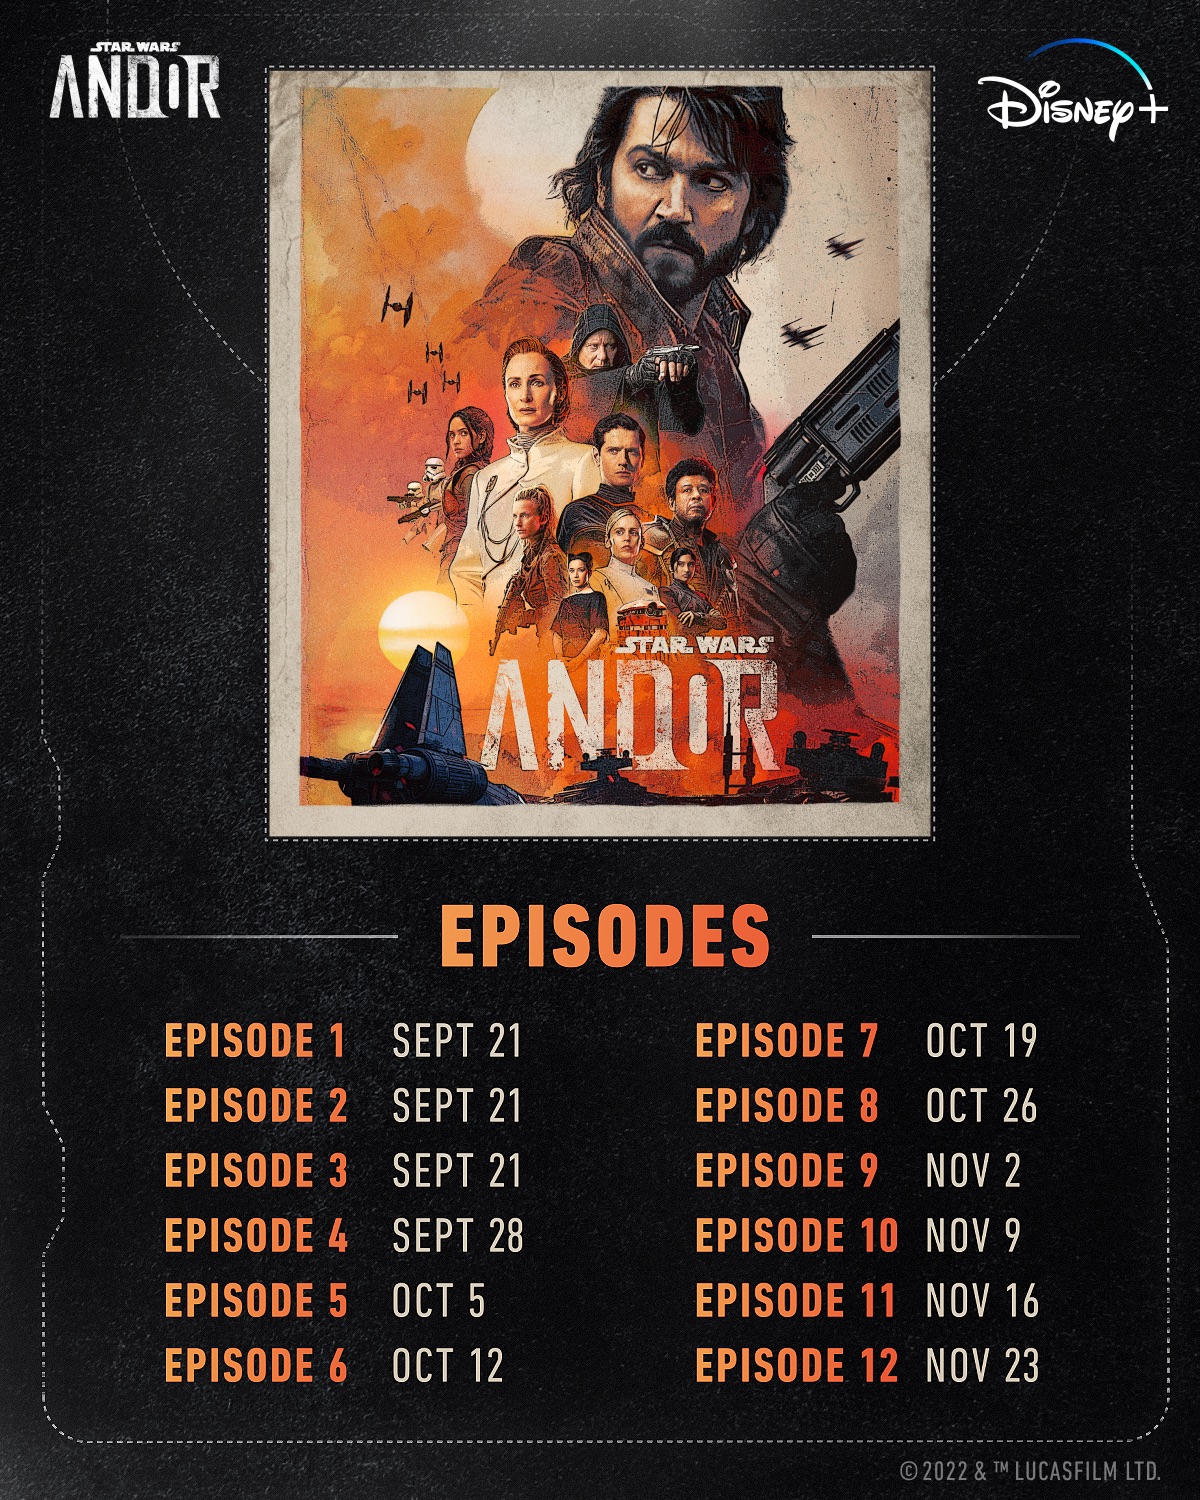 Andor: Release Dates for All 12 Episodes on Disney+